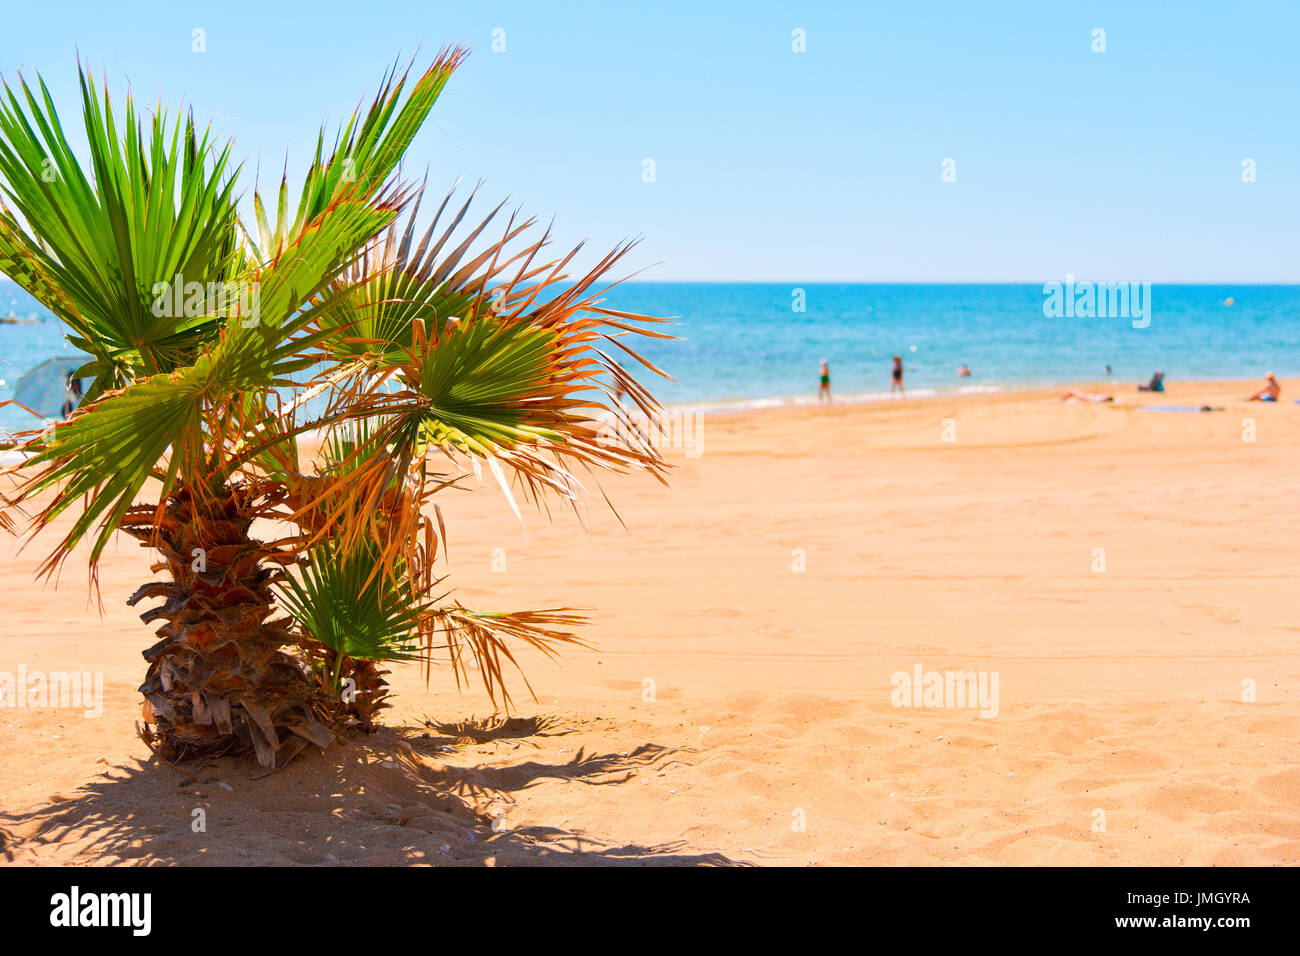 a view of a calm beach in the mediterranean sea with a palm tree in the foreground and some unrecognizable people in the background Stock Photo